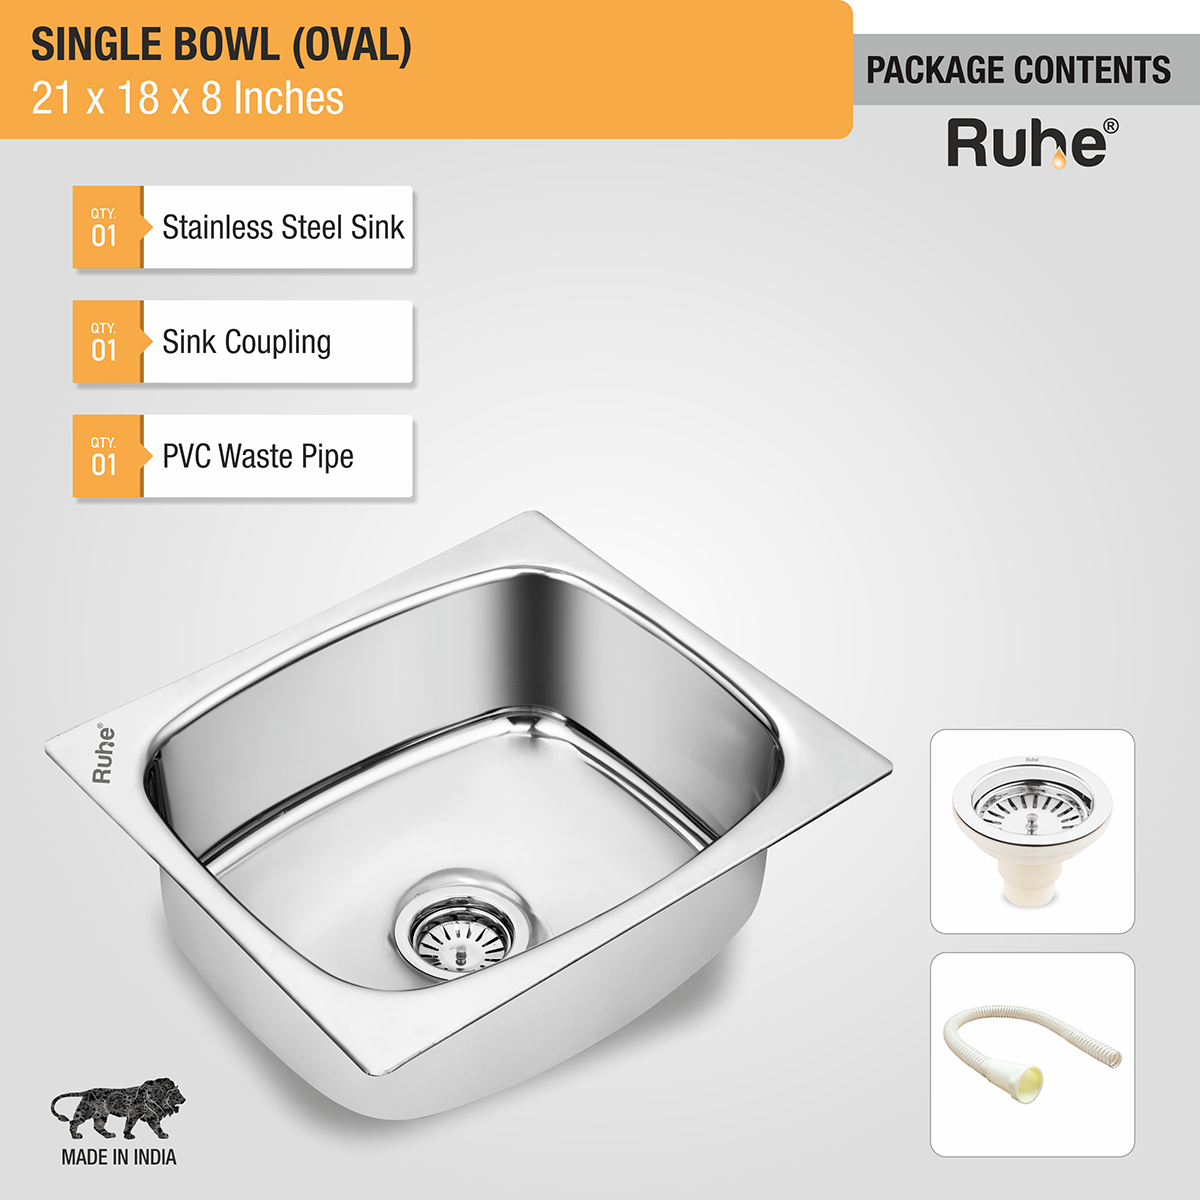 Oval Single Bowl (21 x 18 x 8 inches) Kitchen Sink package